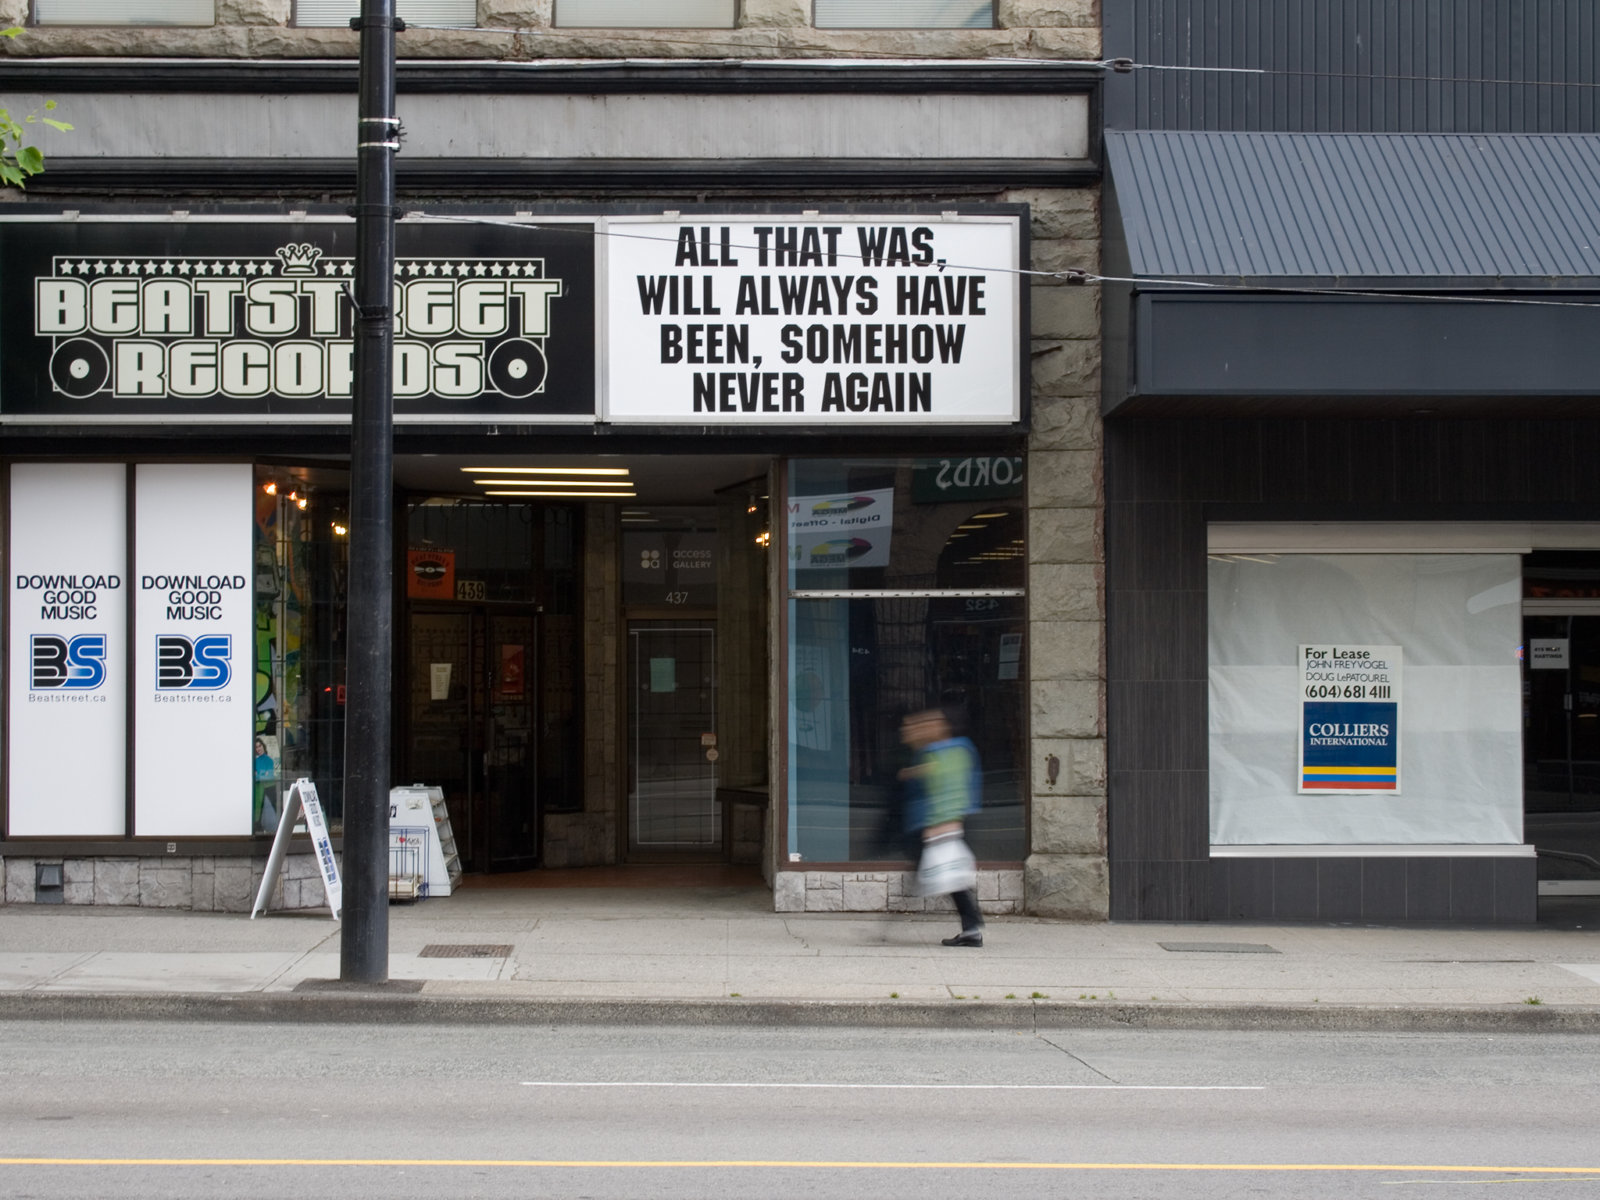 Raymond Boisjoly, All That Was Will Always Have Been, Somehow Never Again, 2010, public signage, dimensions variable. Installation view, The Ever-Changing Light, Access Gallery, Vancouver, BC, 2010